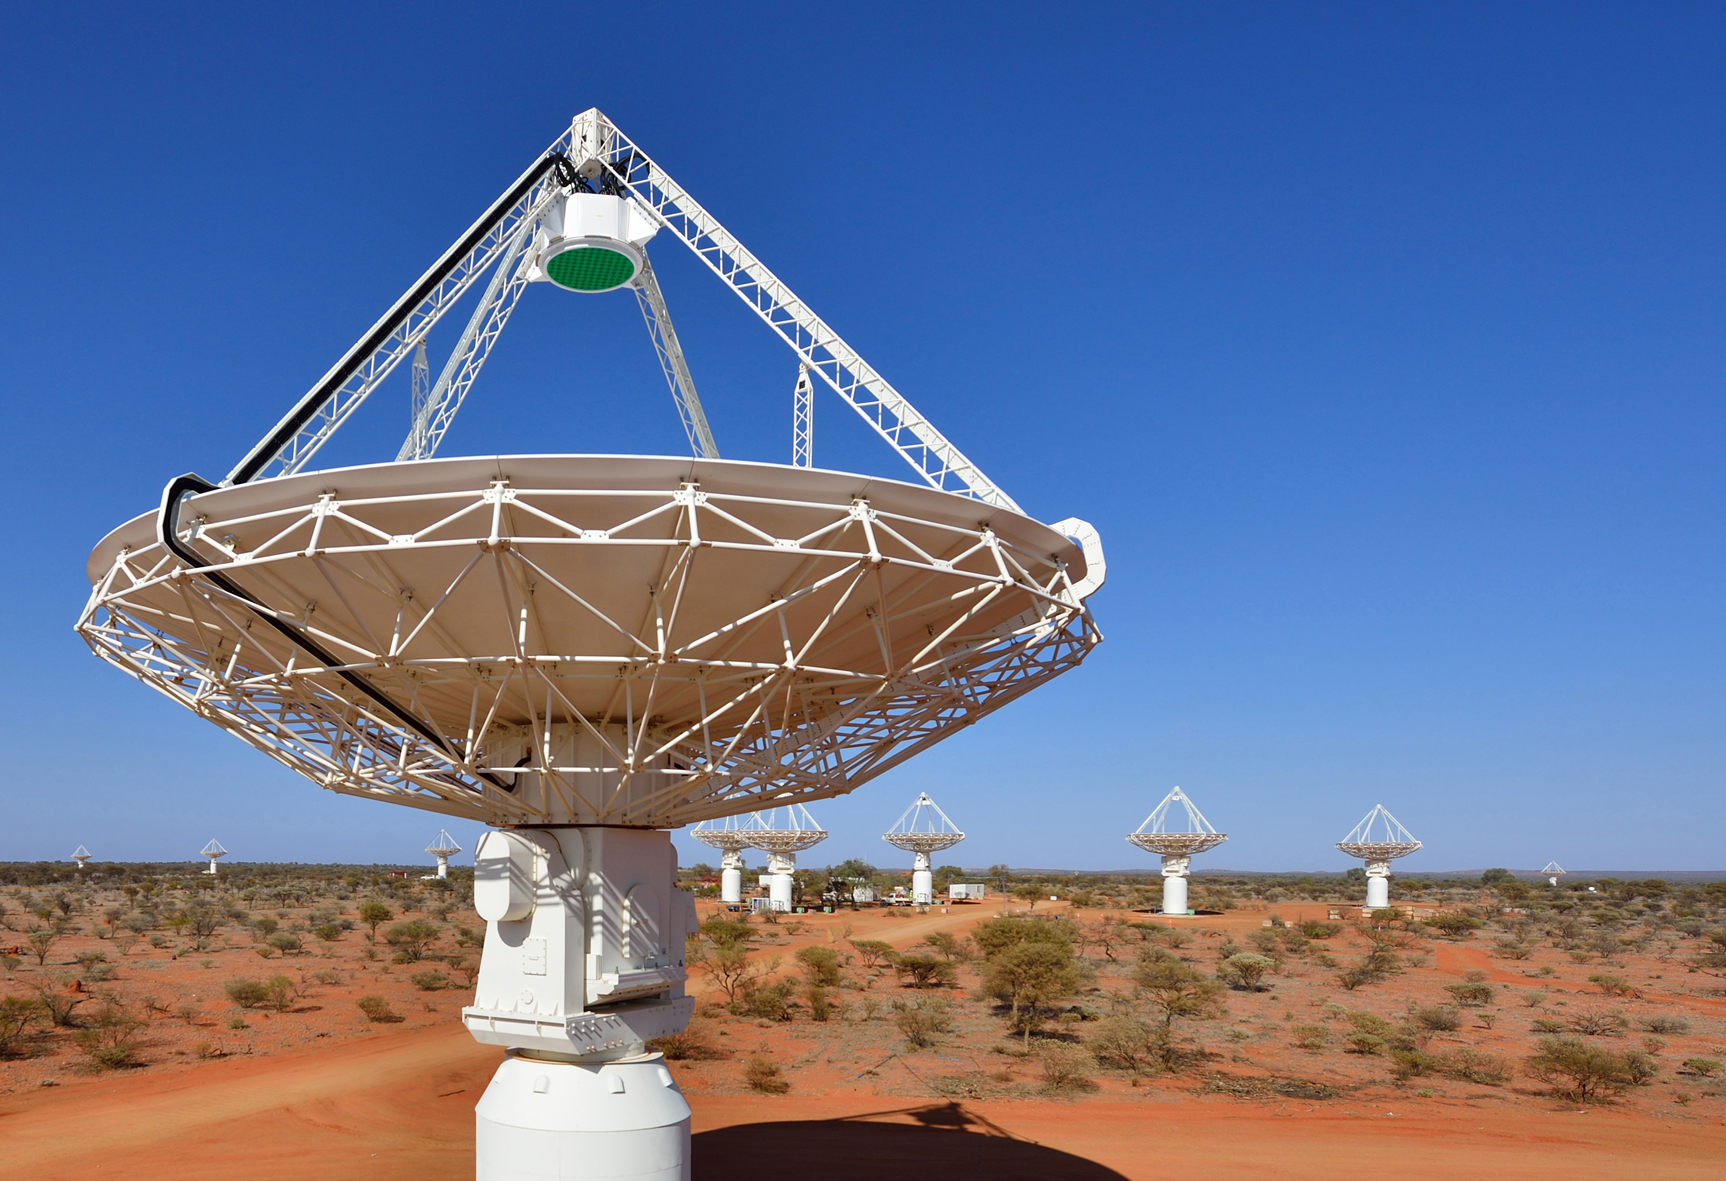 csiro scienceimage 2161 close up of a radio astronomy telescope with several more in the background